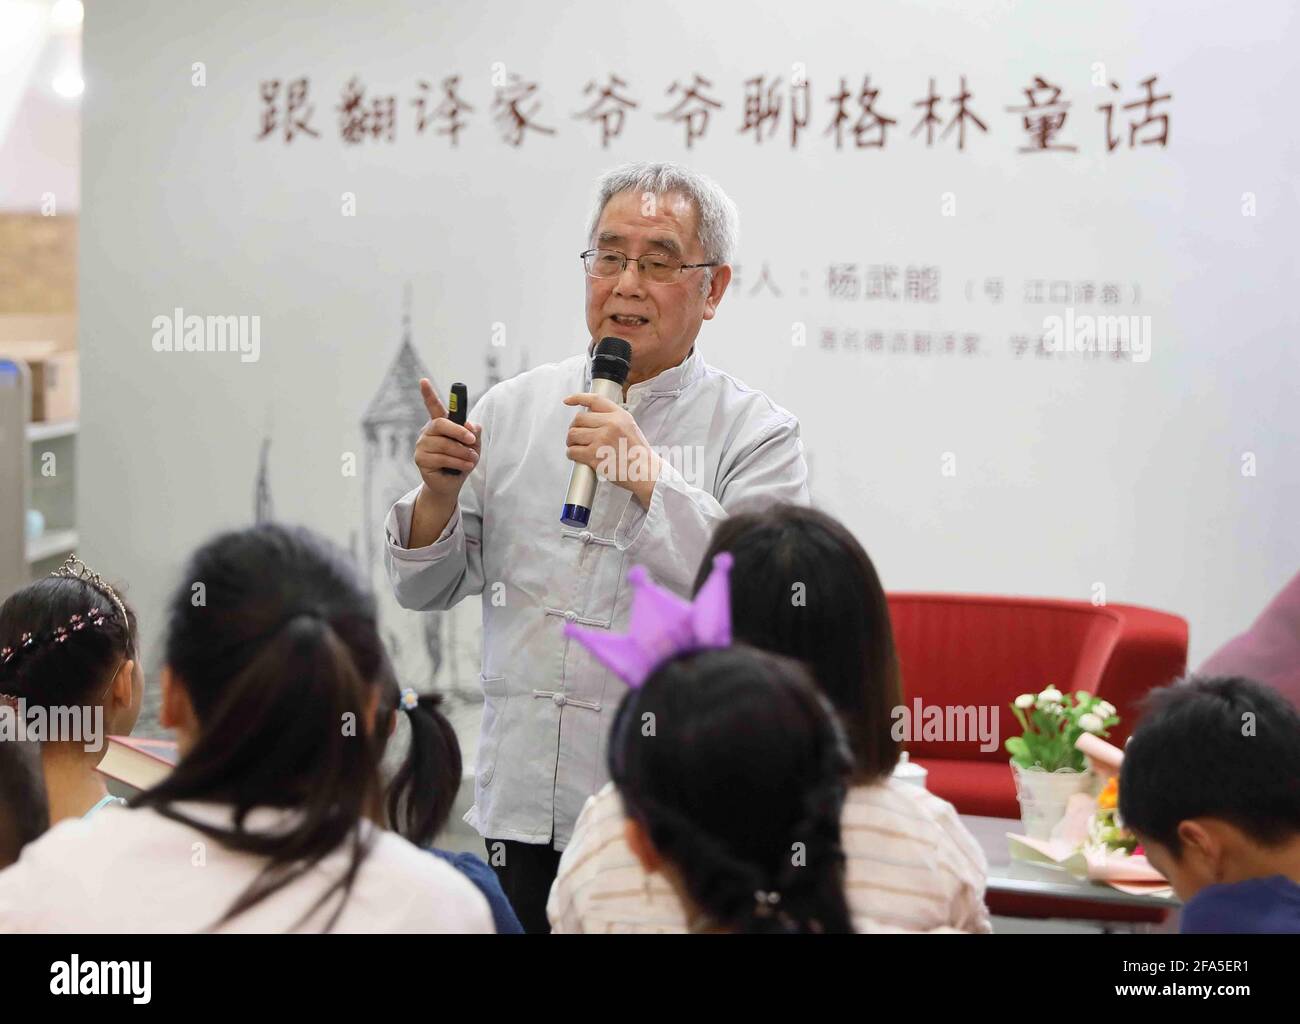 (210423) -- CHENGDU, April 23, 2021 (Xinhua) -- File photo taken in 2018 shows Yang Wuneng meeting young readers at a cultural event on 'Grimms' Fairy Tales' at Chongqing Library in southwest China's Chongqing. In a career that spans over 60 years, Yang Wuneng has translated 31 German classics into the Chinese language, including 'Faust', 'Selected Poems of Heinrich Heine' and 'Immensee.' Many of his translations are still bestselling books in some bookstores. His translation of 'Grimms' Fairy Tales,' for instance, has been popular among Chinese readers for many generations. Today, Yang is sti Stock Photo